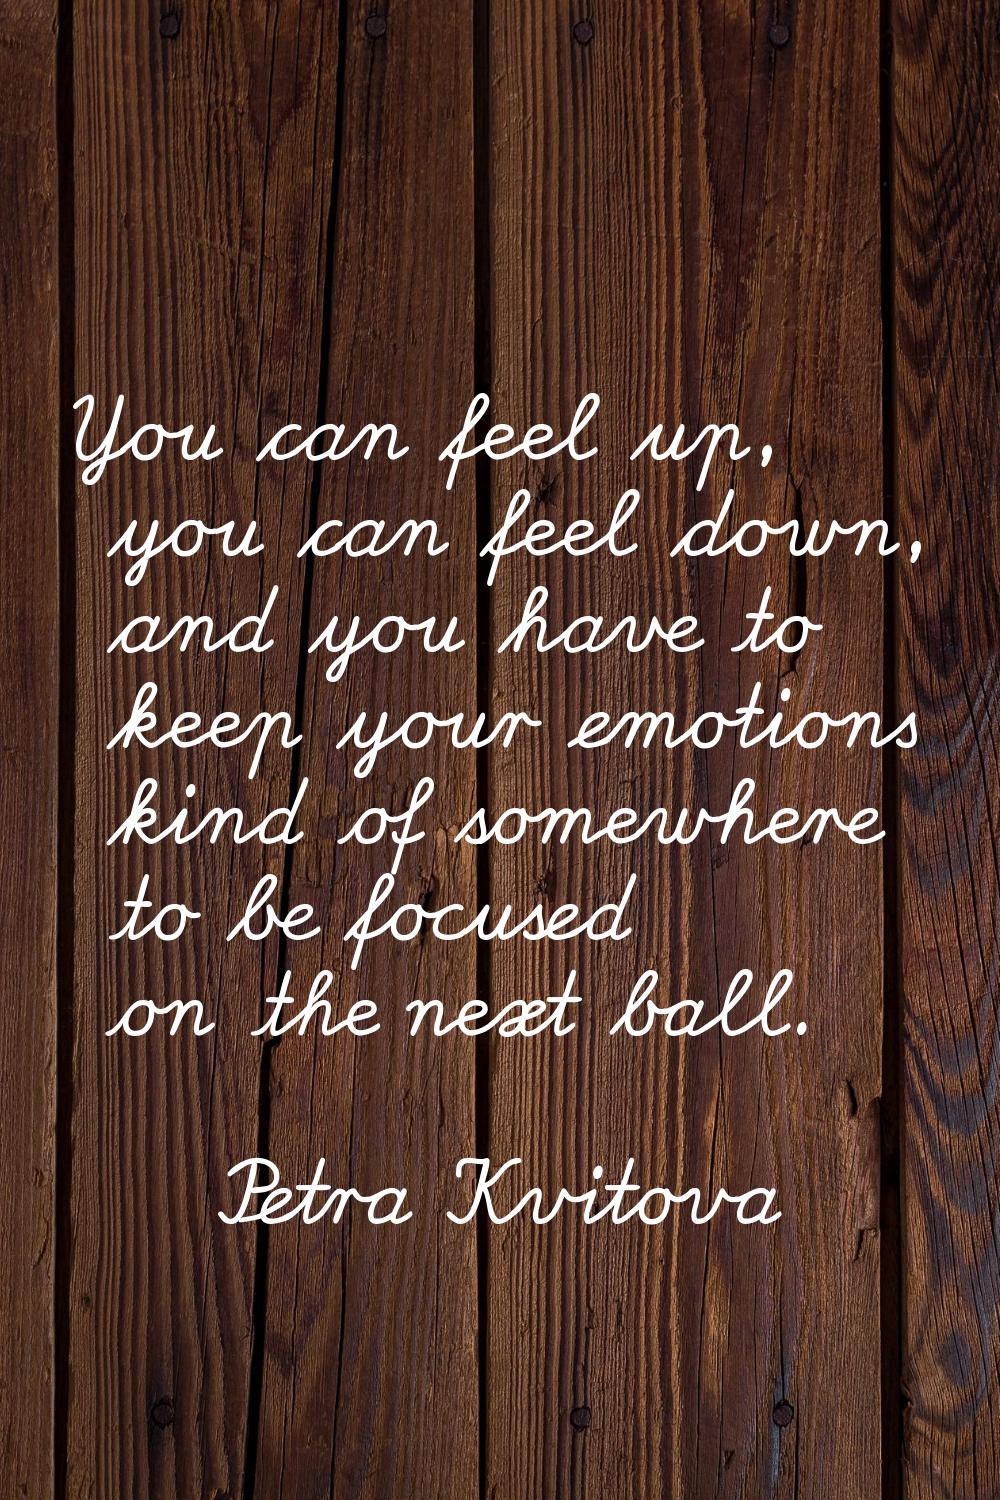 You can feel up, you can feel down, and you have to keep your emotions kind of somewhere to be focu